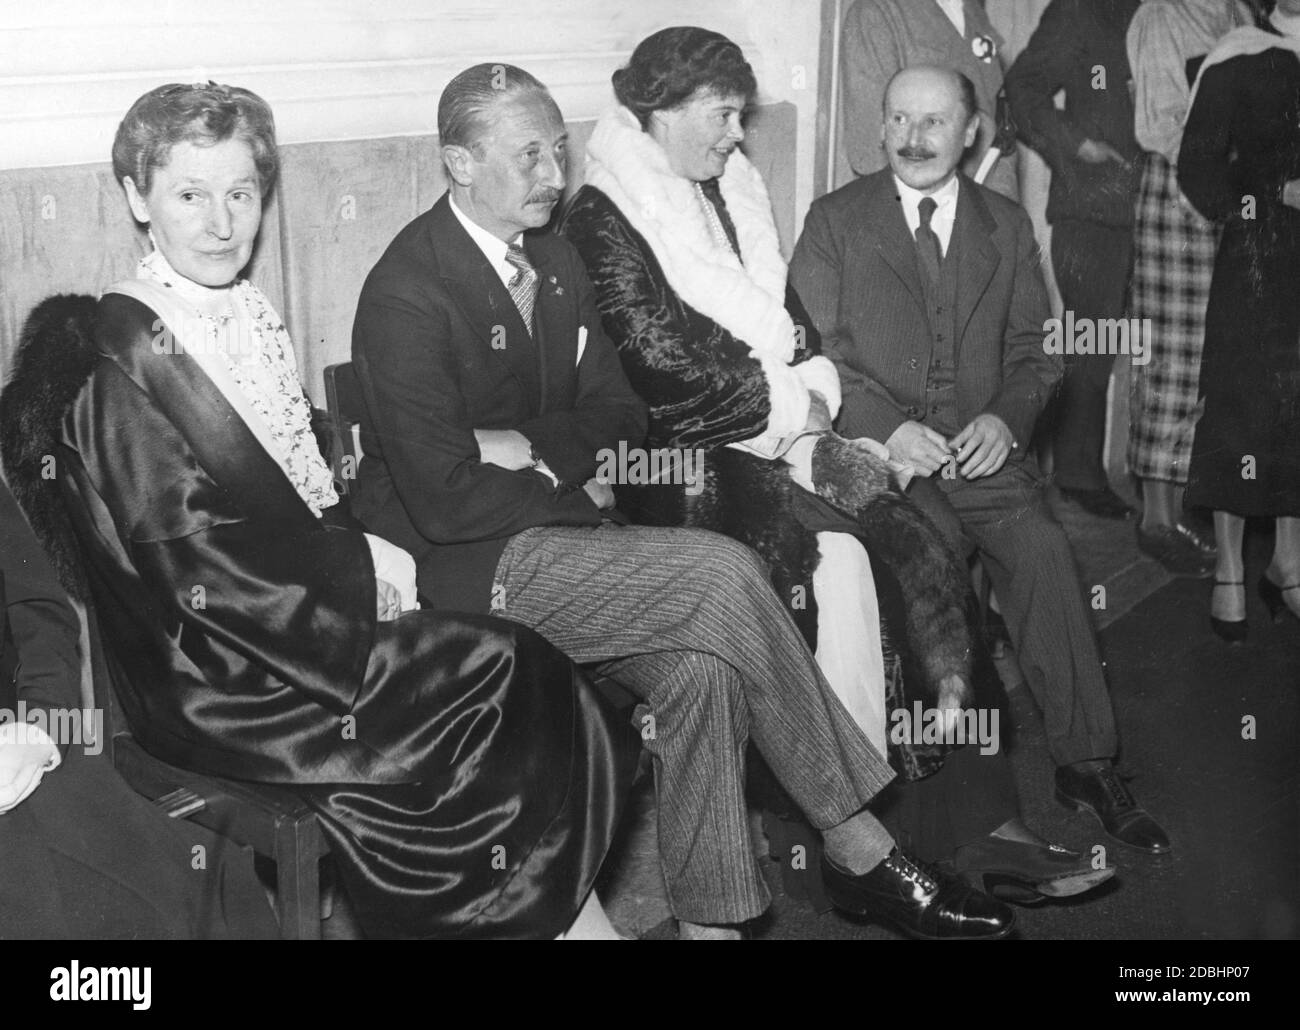 'At the public dress rehearsal of the play ''Iphigenie in Aulis'' on a Saturday evening in the Pergamon Museum in Berlin, the following people were also present as spectators (from left to right): Maria Sarre (daughter of Carl Humann, married to Friedrich Sarre), Prince August Wilhelm of Prussia, Crown Princess Cecilie of Mecklenburg and General Director of the Museums Geheimer Rat Wilhelm Waetzoldt. ' Stock Photo